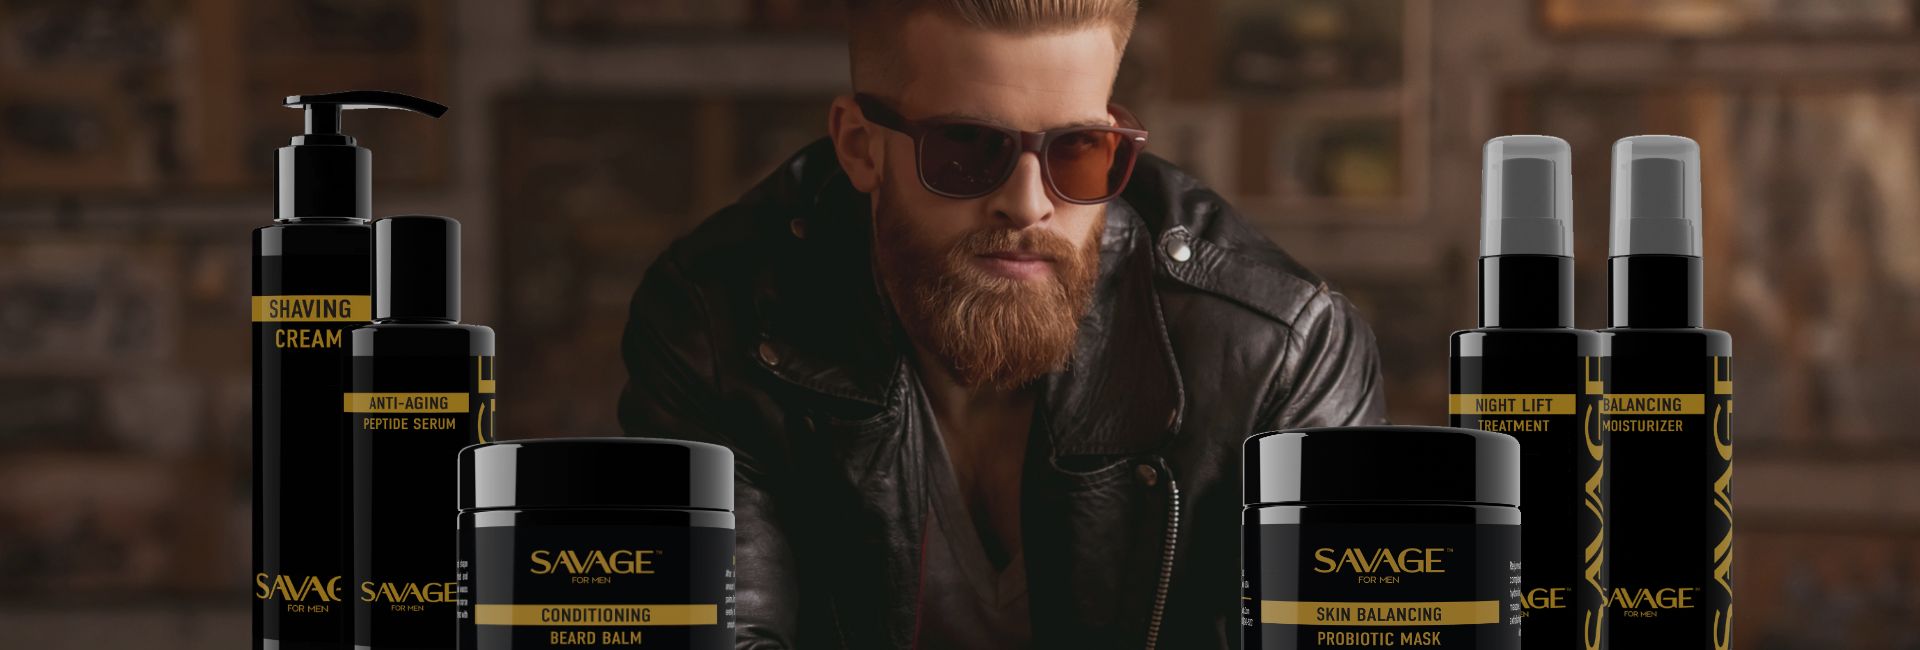 Fusion CBD Products savage for men